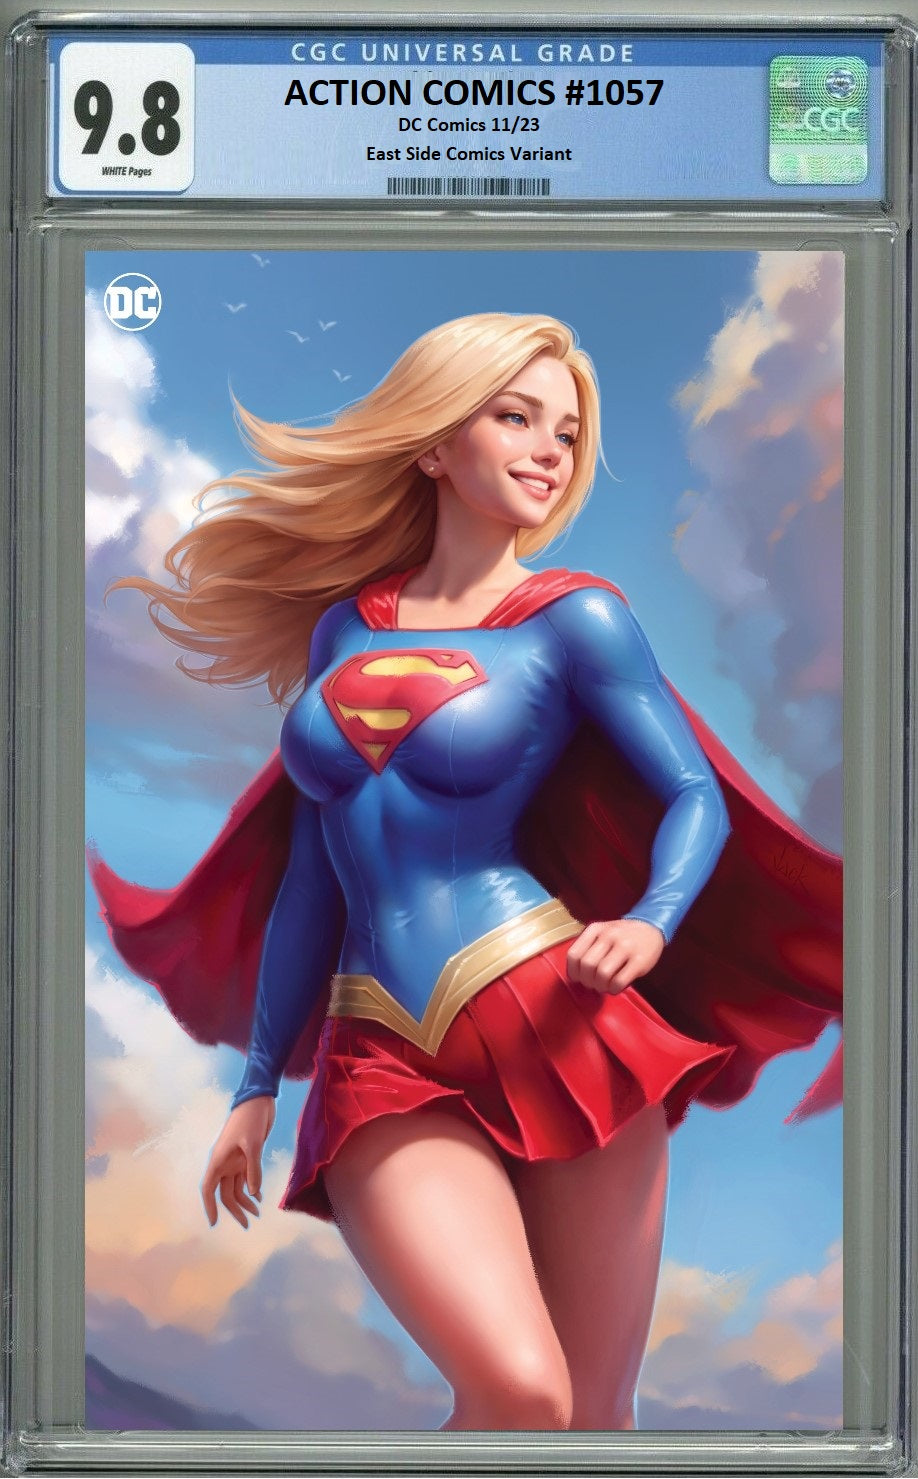 ACTION COMICS #1057 WILL JACK VIRGIN VARIANT LIMITED TO 1500 COPIES CGC 9.8 PREORDER